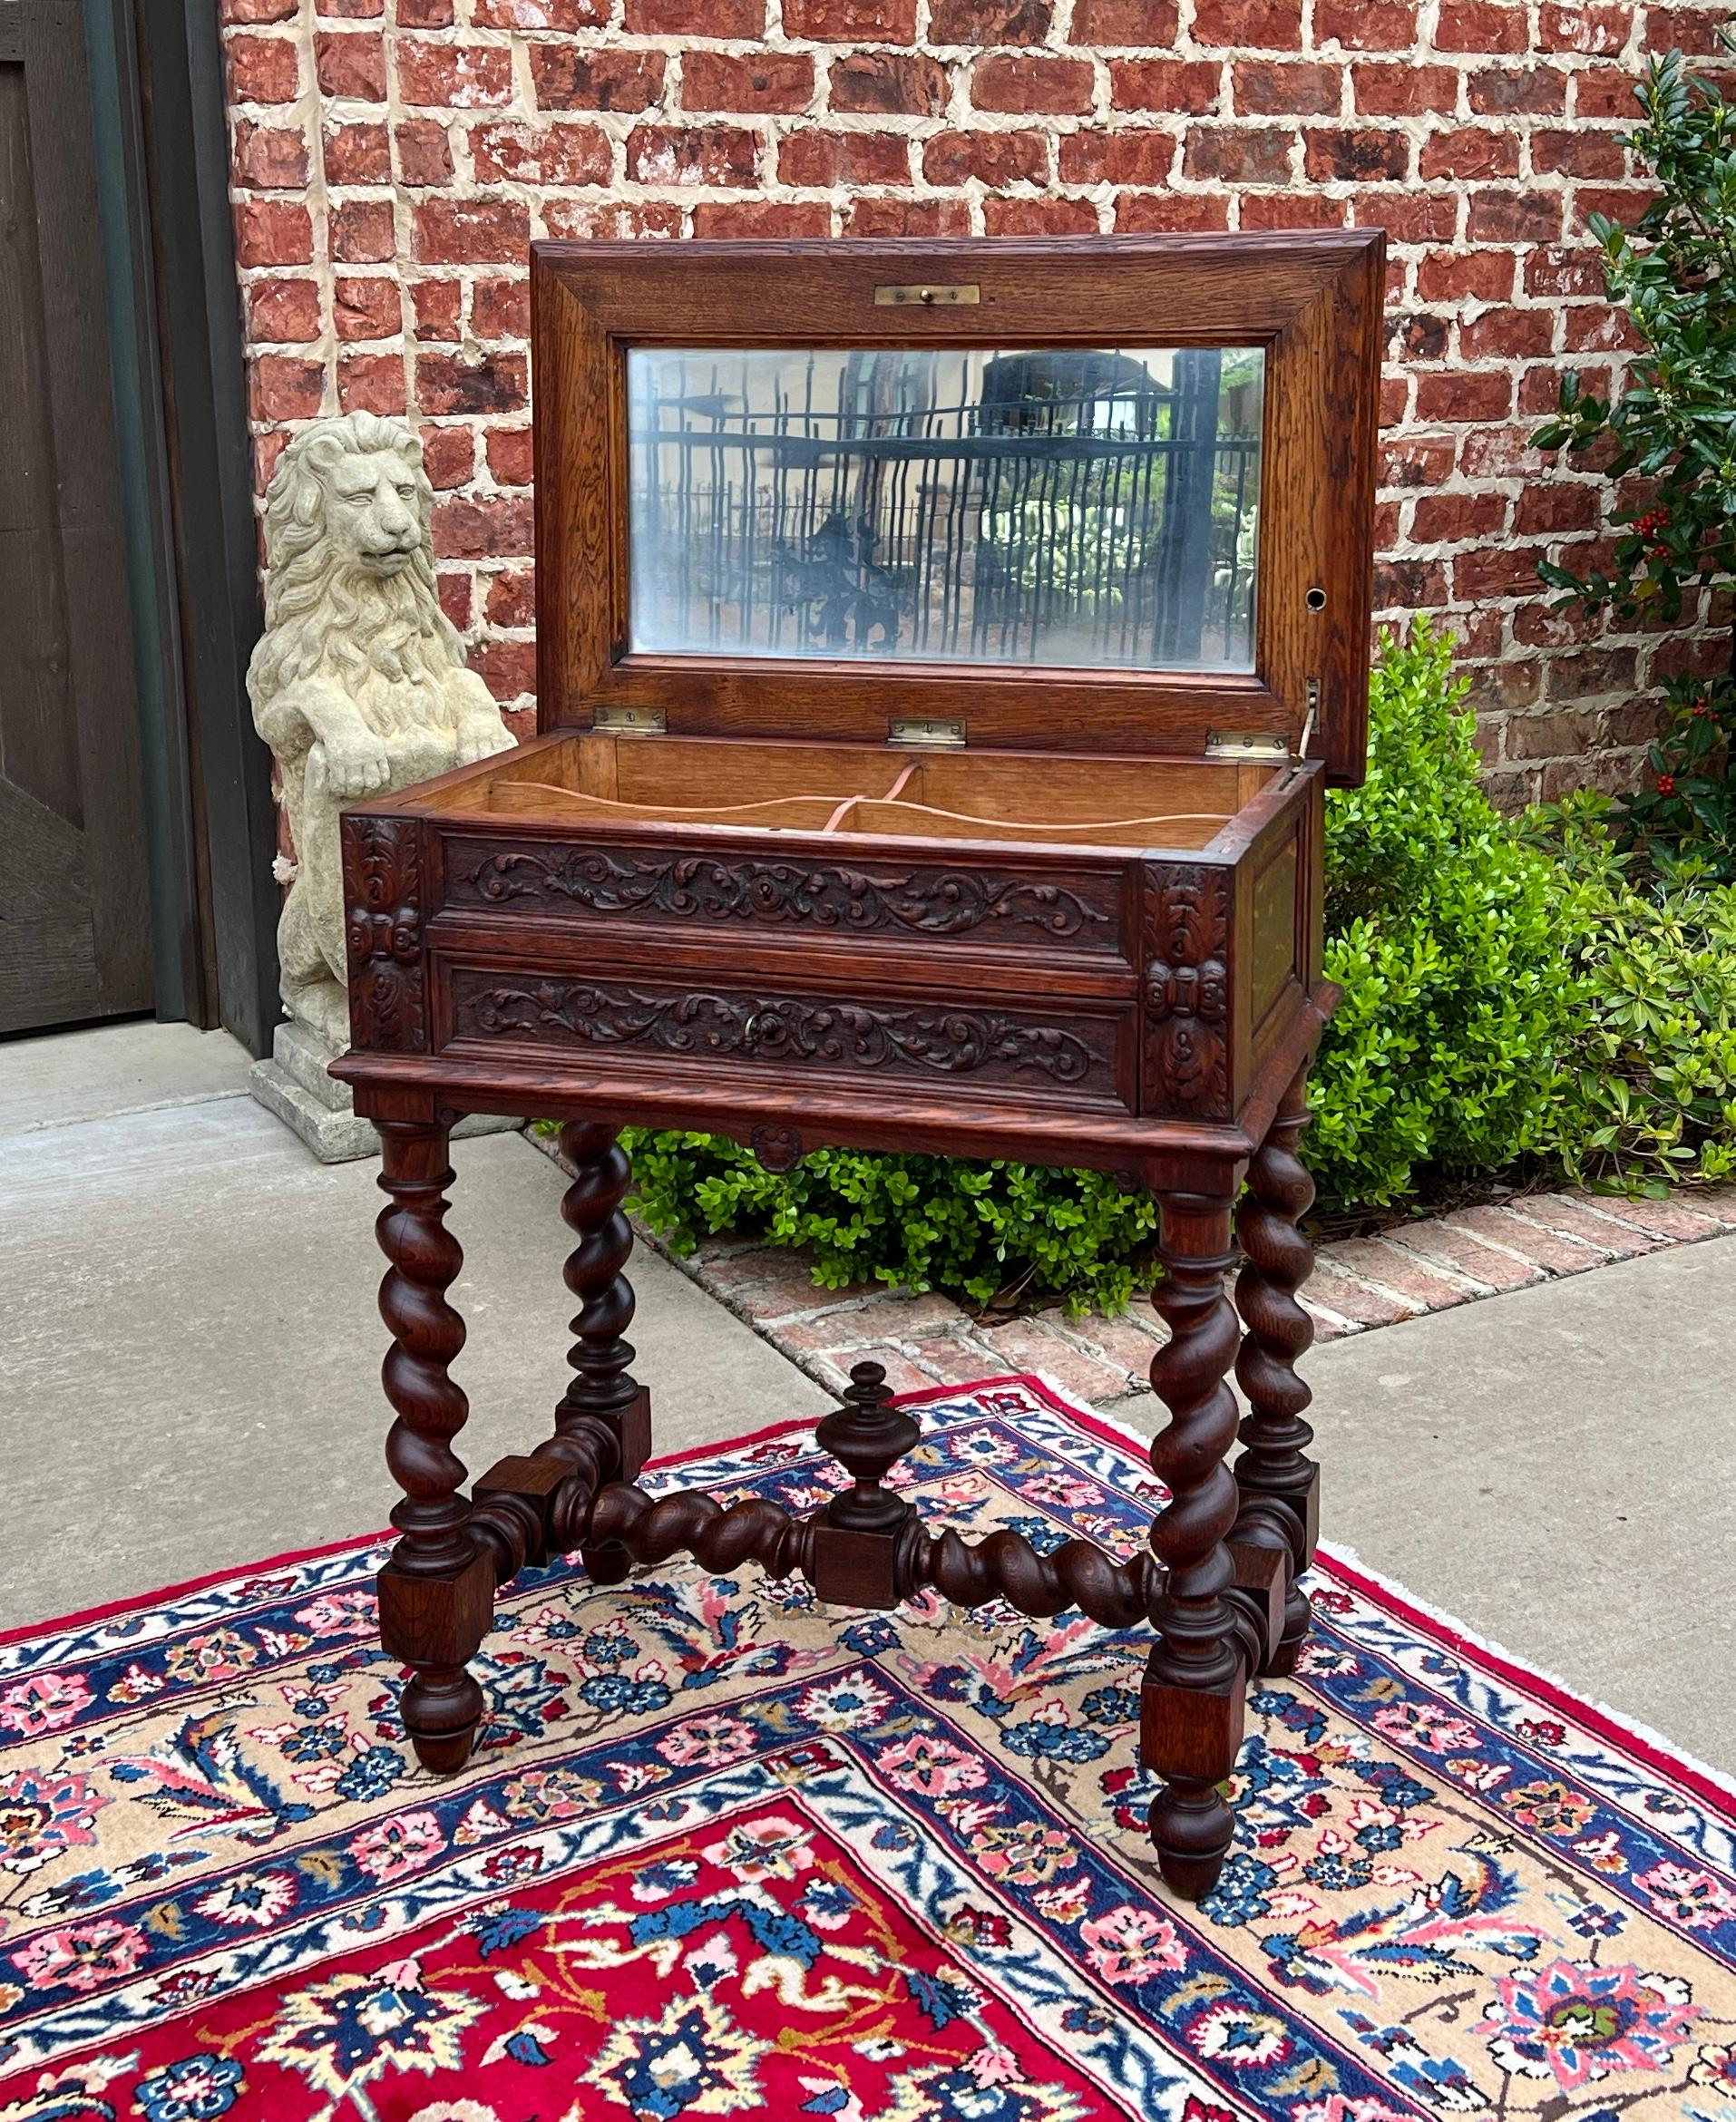 BEAUTIFUL Late 19th Century Antique French Oak BARLEY TWIST Jewelry Table/Serving Chest/Box or End Table ~~Victorian Era Renaissance Revival
~~c. 1890s

These versatile tables were very popular in late Victorian era French country homes and